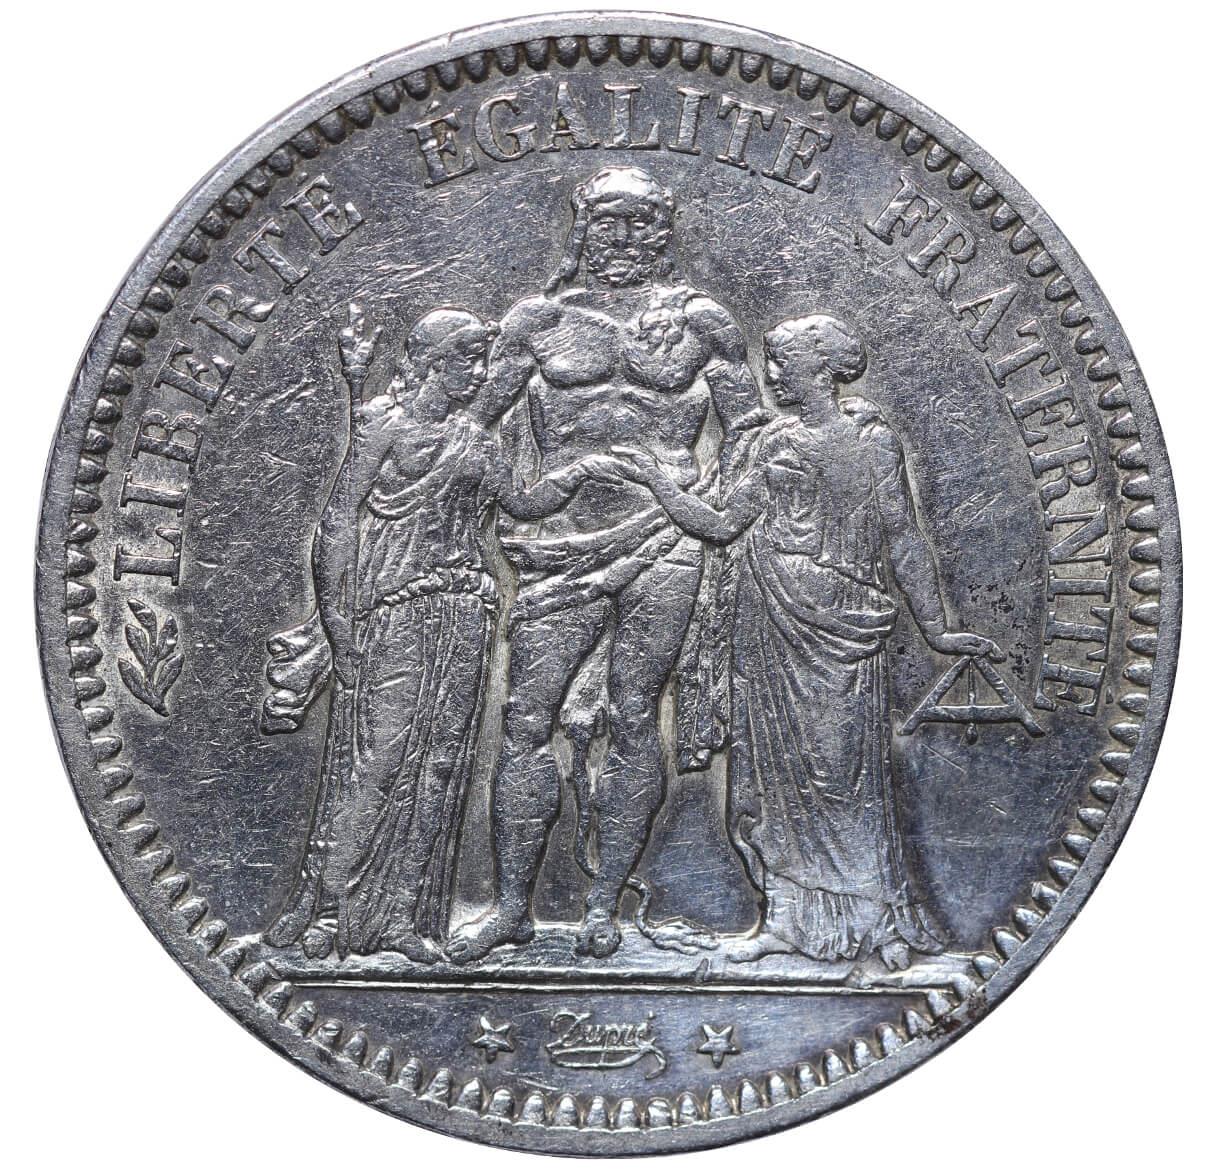 France, 5 Francs, 1871 year, A - Image 3 of 3